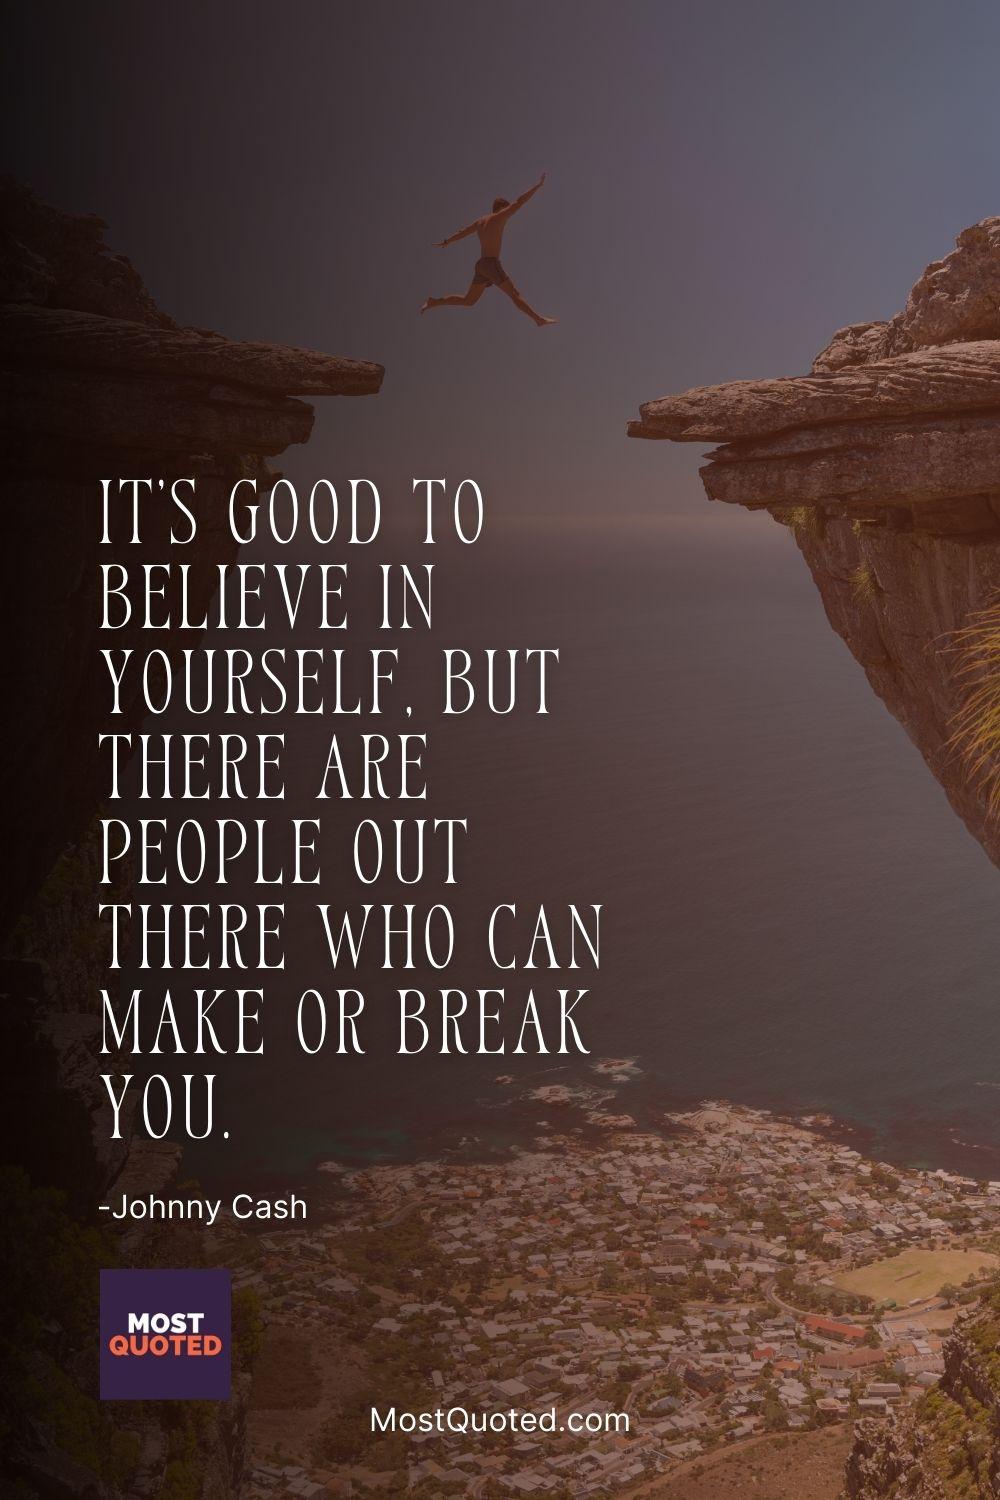 It's good to believe in yourself, but there are people out there who can make or break you. - Johnny Cash